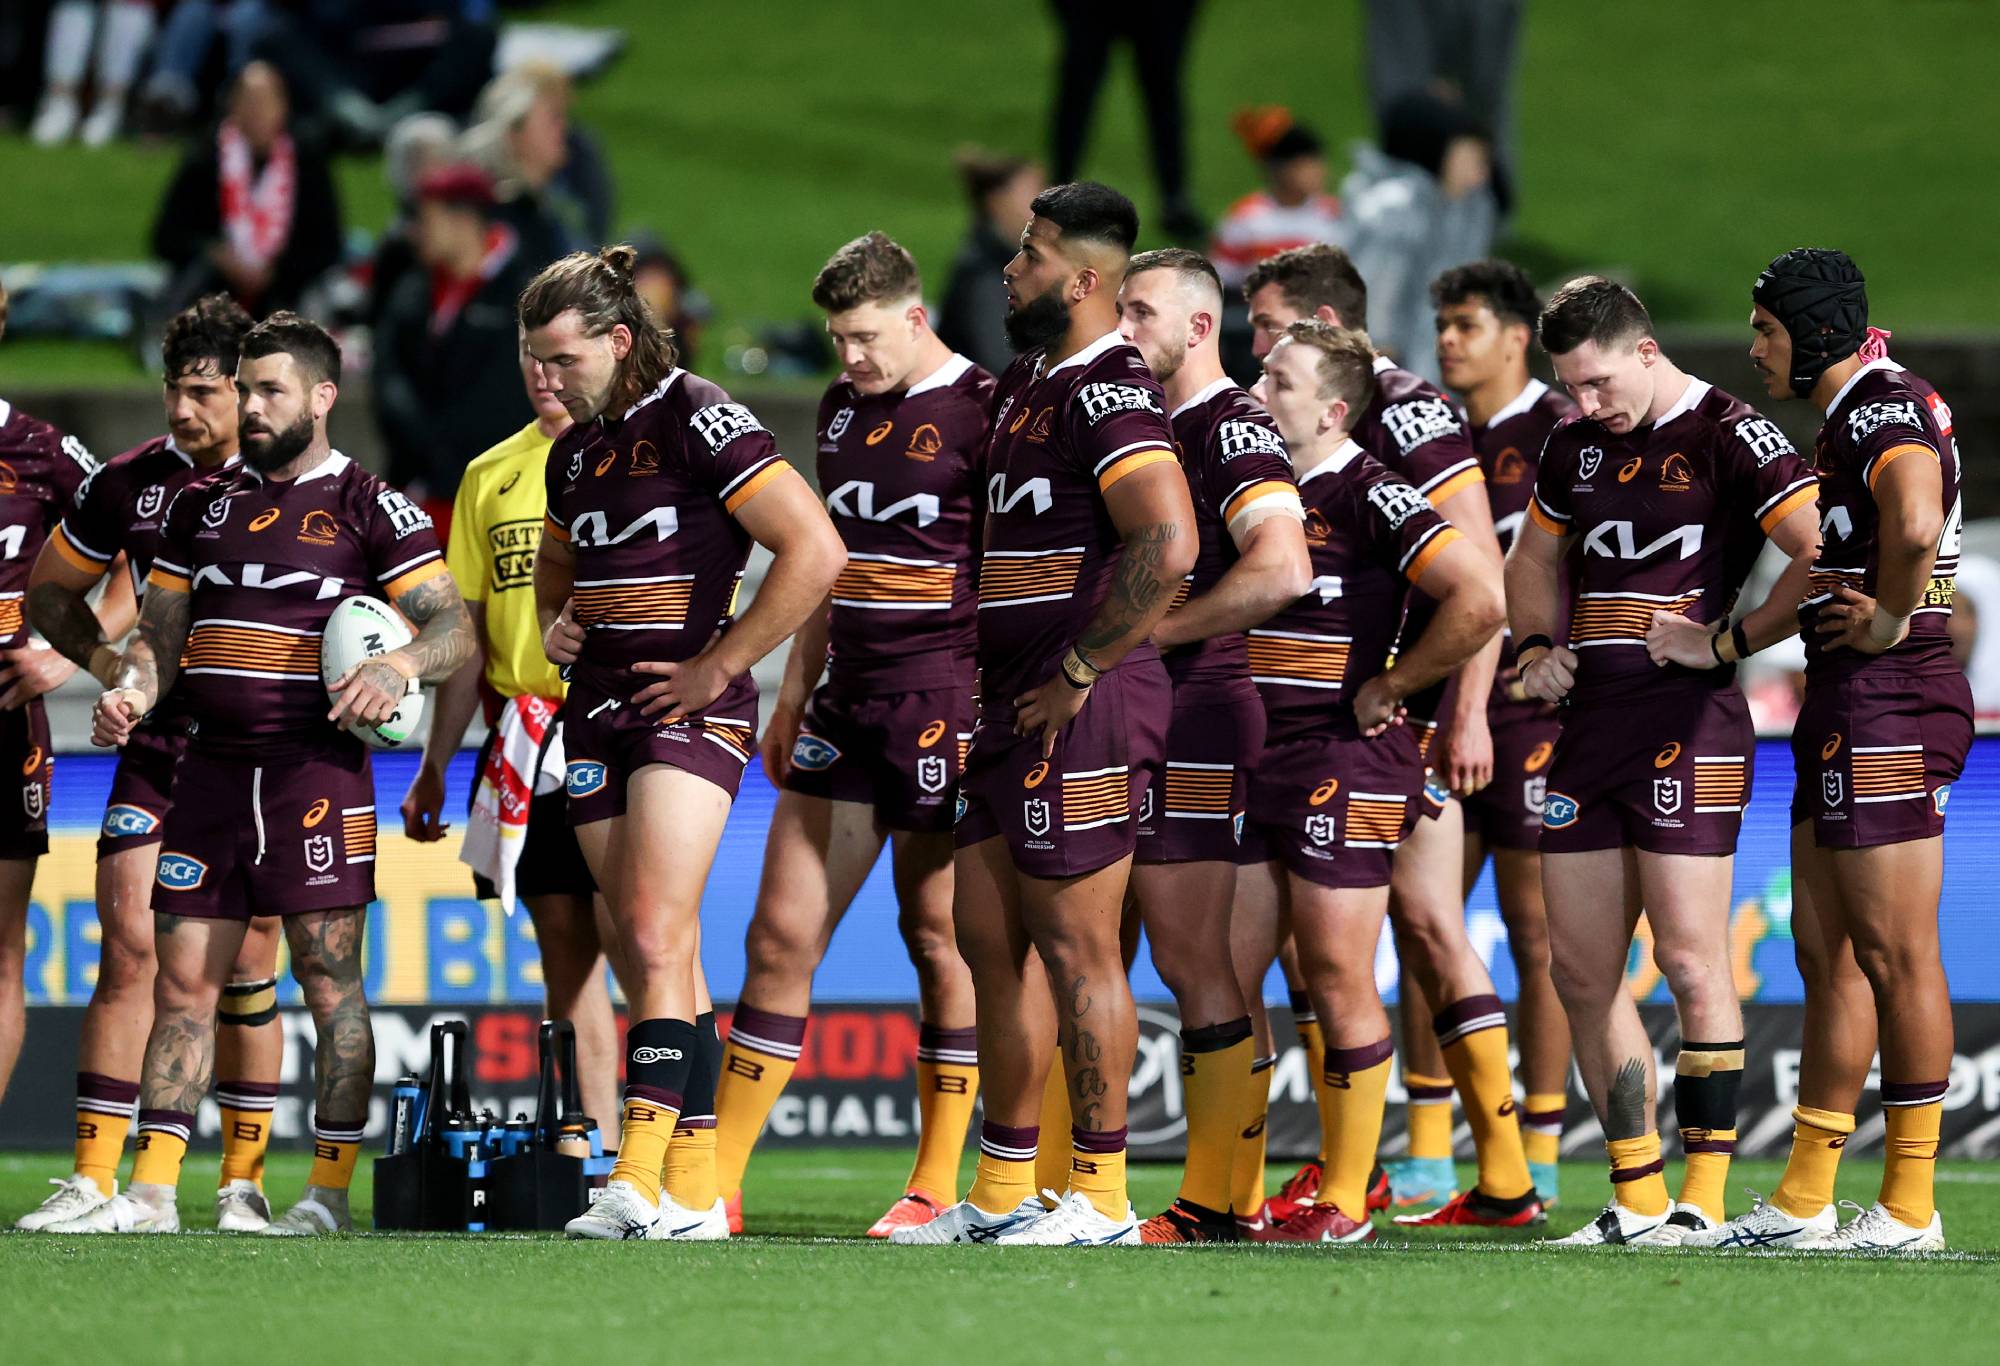 SYDNEY, AUSTRALIA - SEPTEMBER 03: Broncos players react during the round 25 NRL match between the St George Illawarra Dragons and the Brisbane Broncos at Netstrata Jubilee Stadium, on September 03, 2022, in Sydney, Australia. (Photo by Brendon Thorne/Getty Images)